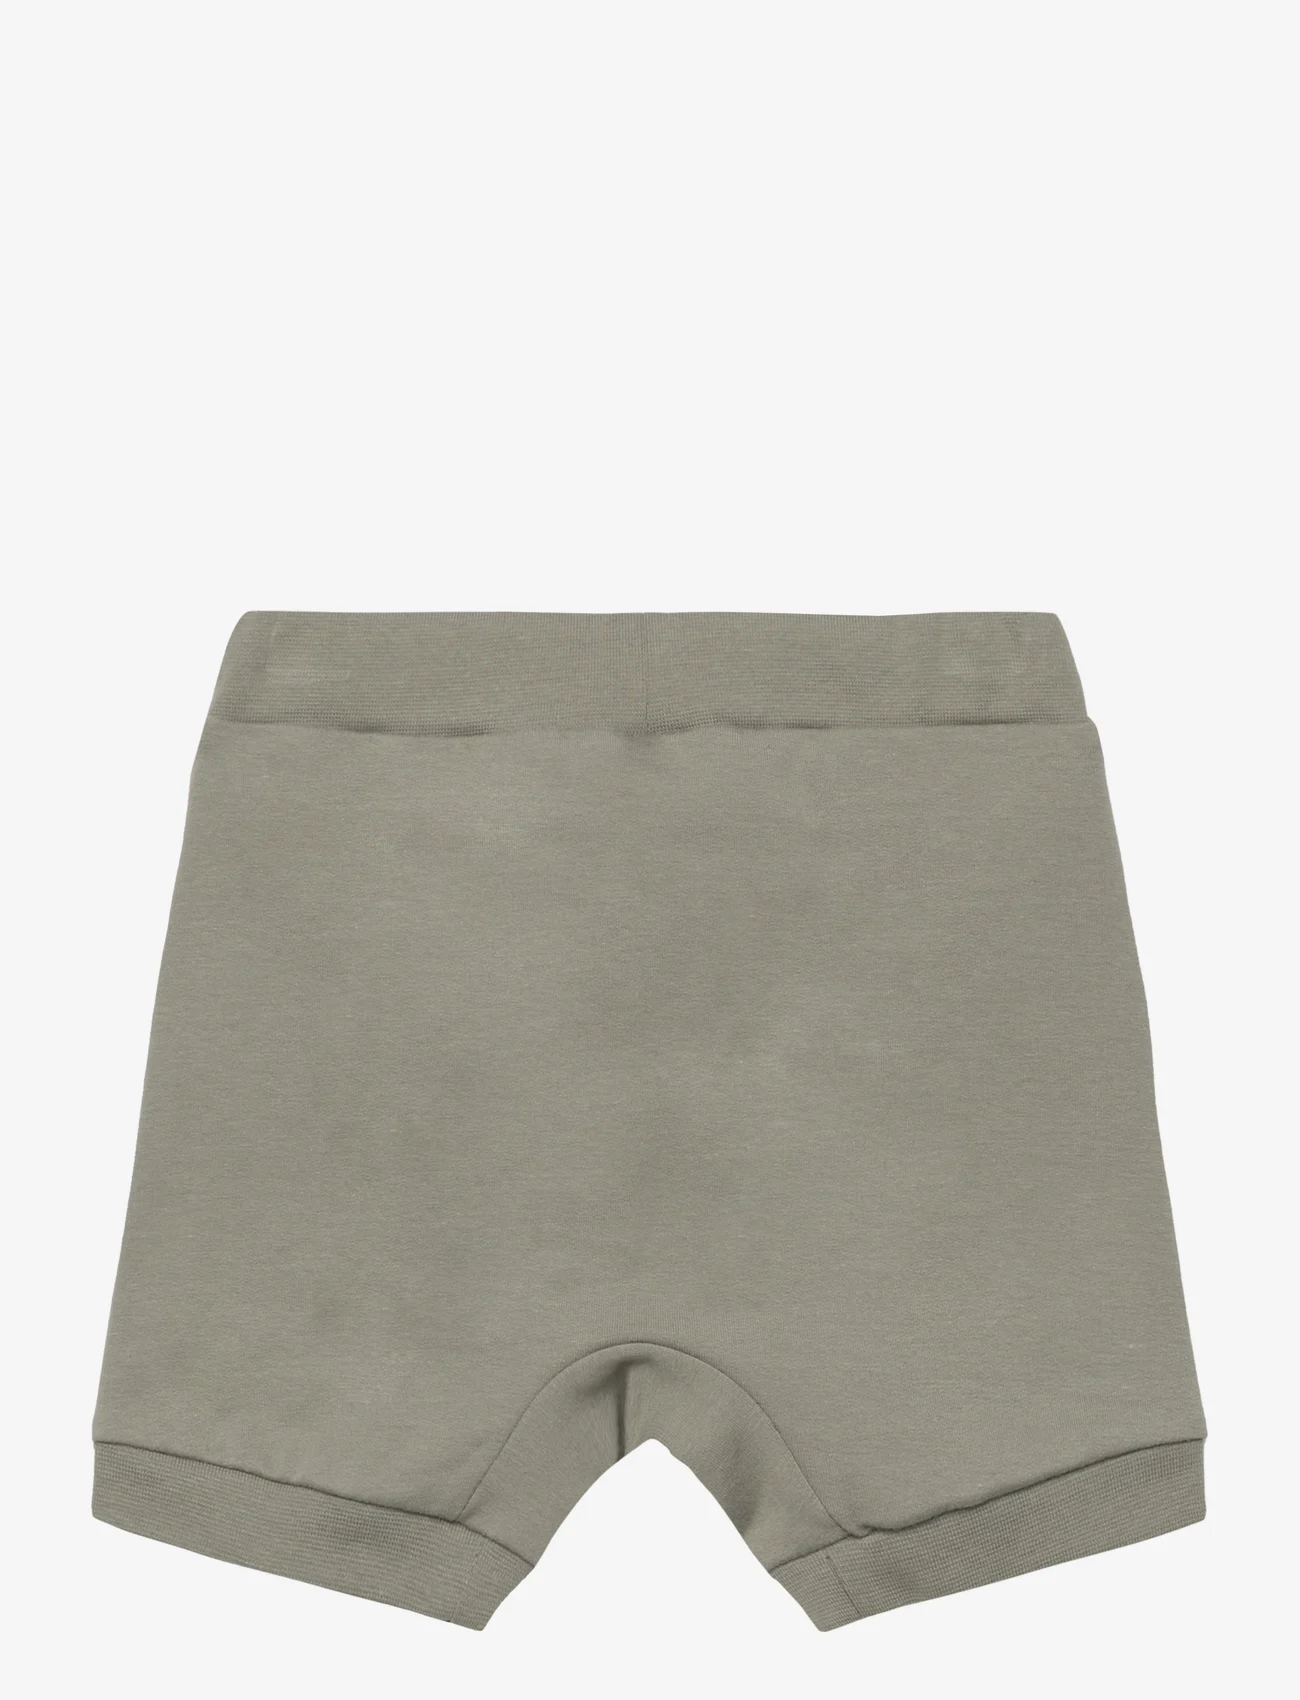 Hust & Claire - Hubert - sweat shorts - seagrass - 1